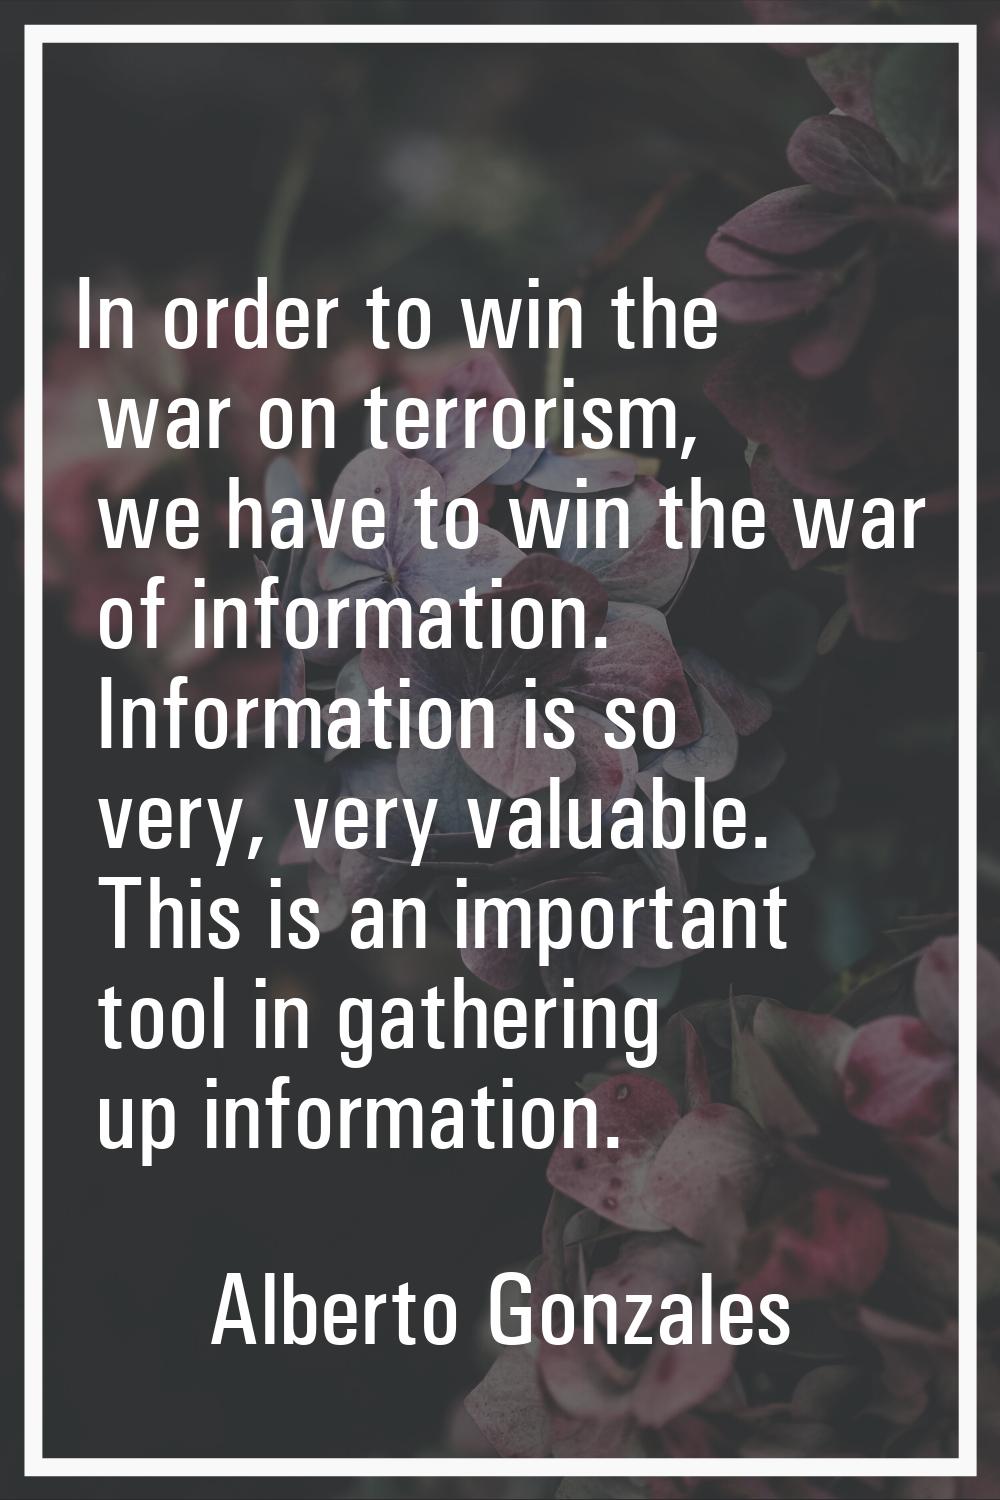 In order to win the war on terrorism, we have to win the war of information. Information is so very